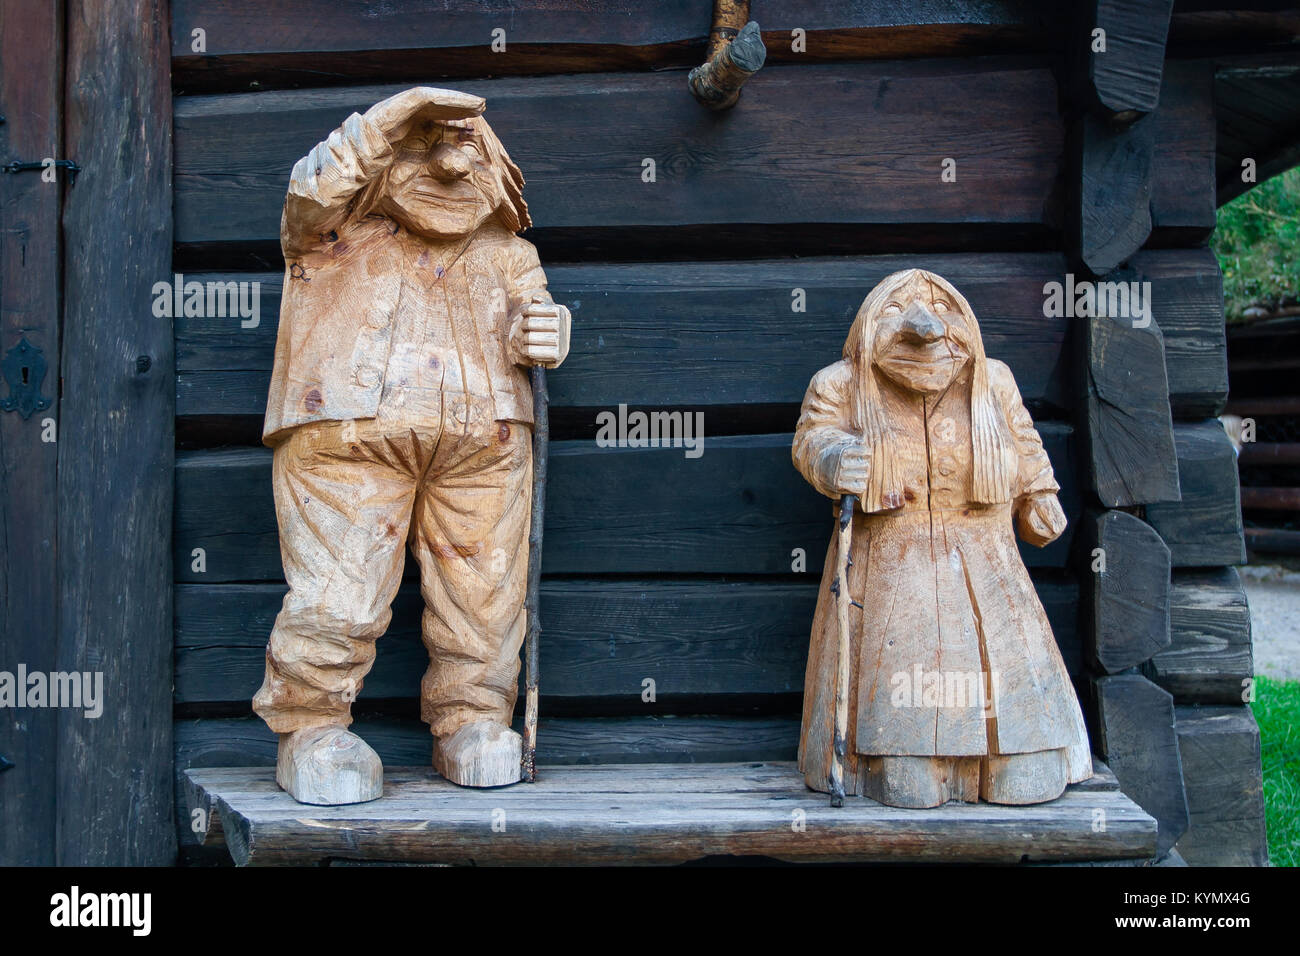 Carved in wood large statues of old couple man and woman trolls traditional folklore in Norway Stock Photo